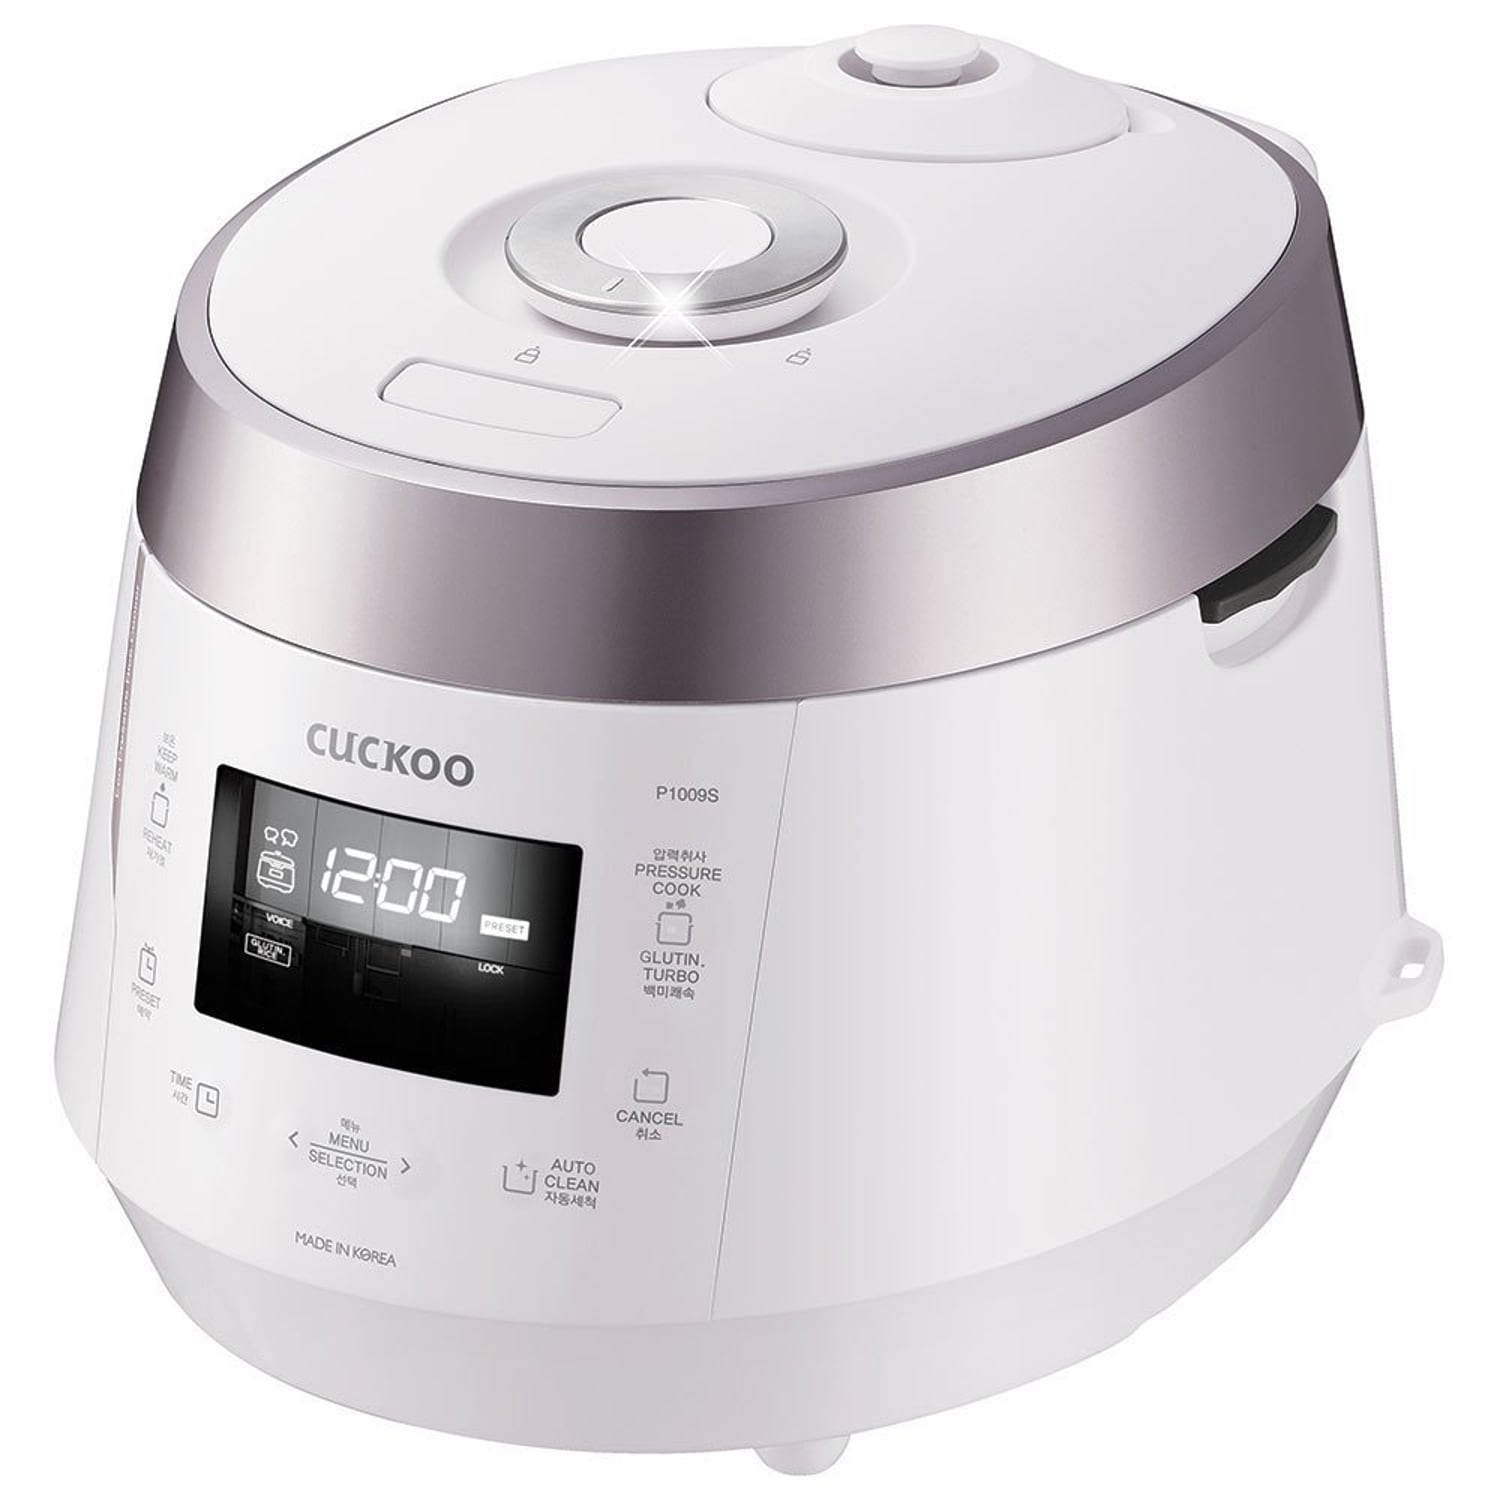 RICE COOKER 10 CUP, White – Lovetocook